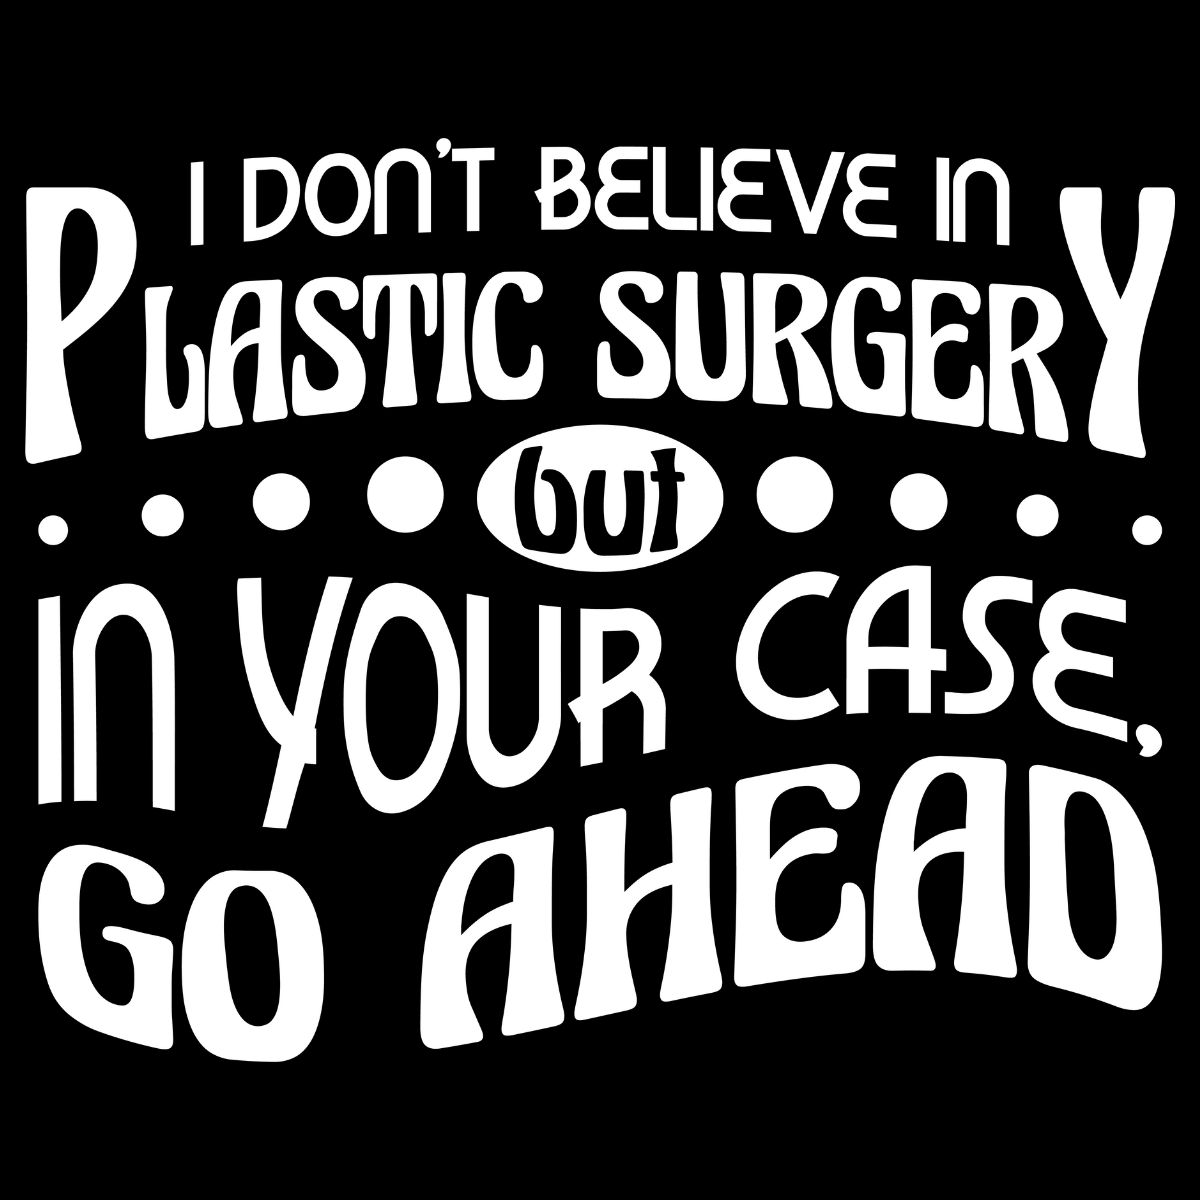 I Don't Believe In Plastic Surgery But In Your Case, Go Ahead Tee